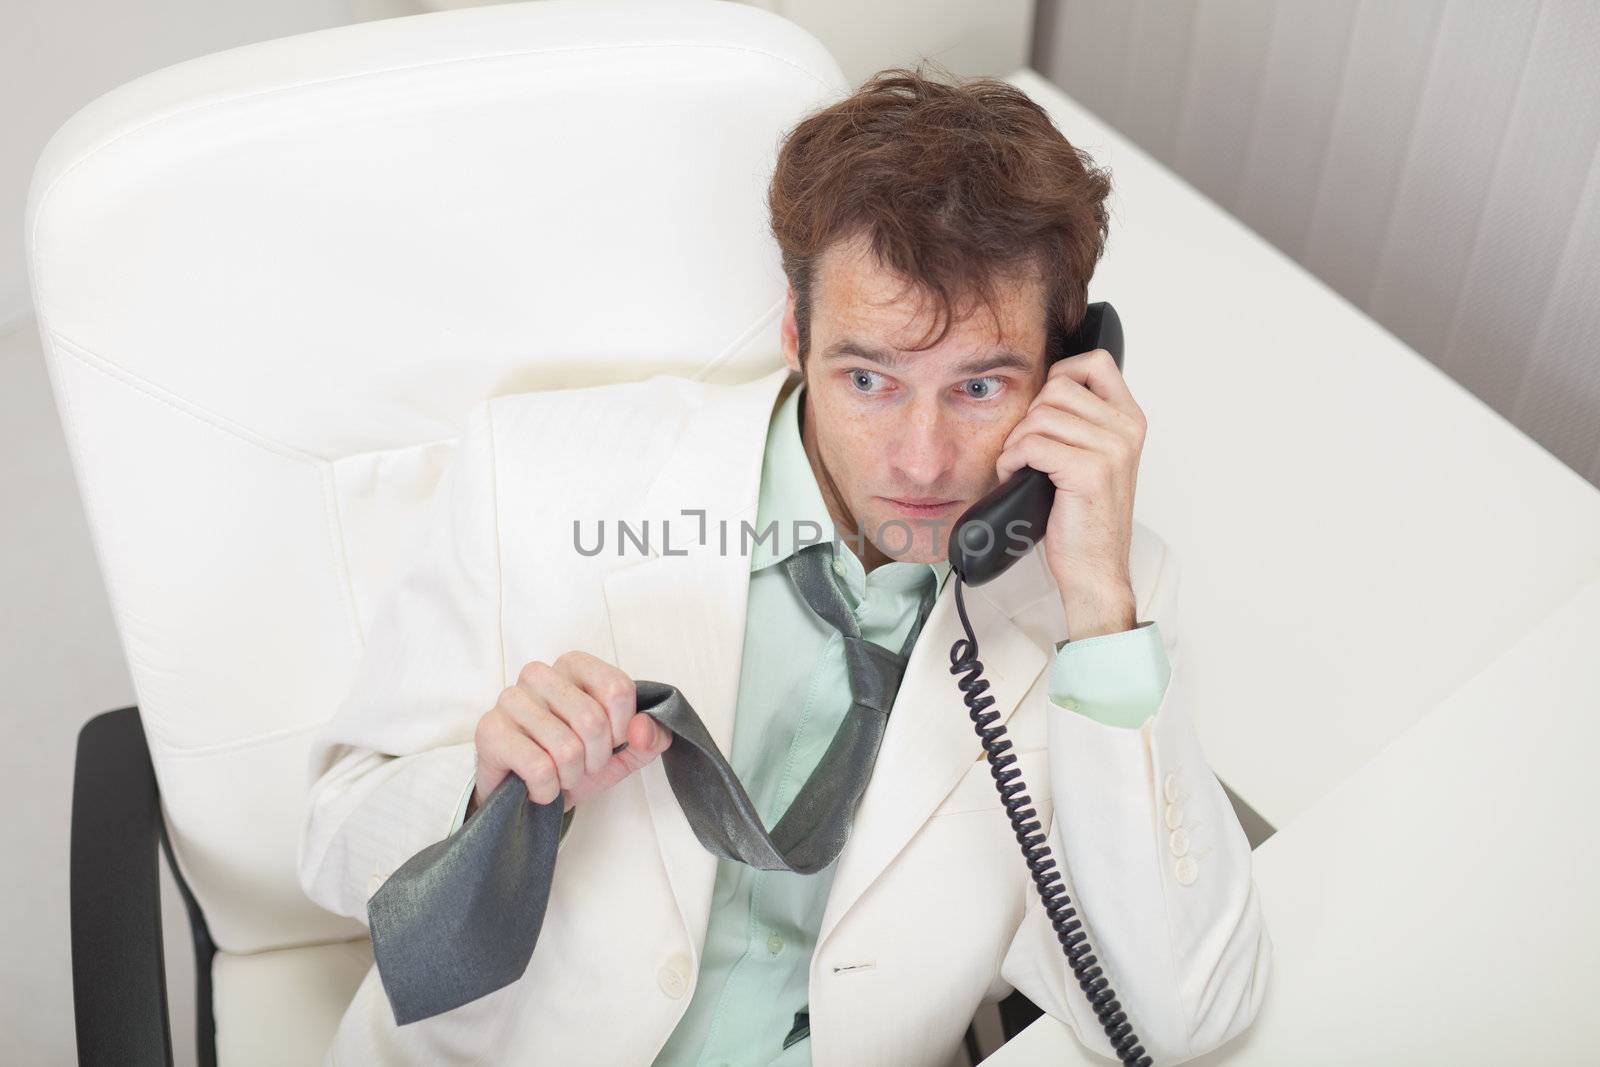 The businessman in a white jacket emotionally talks by phone